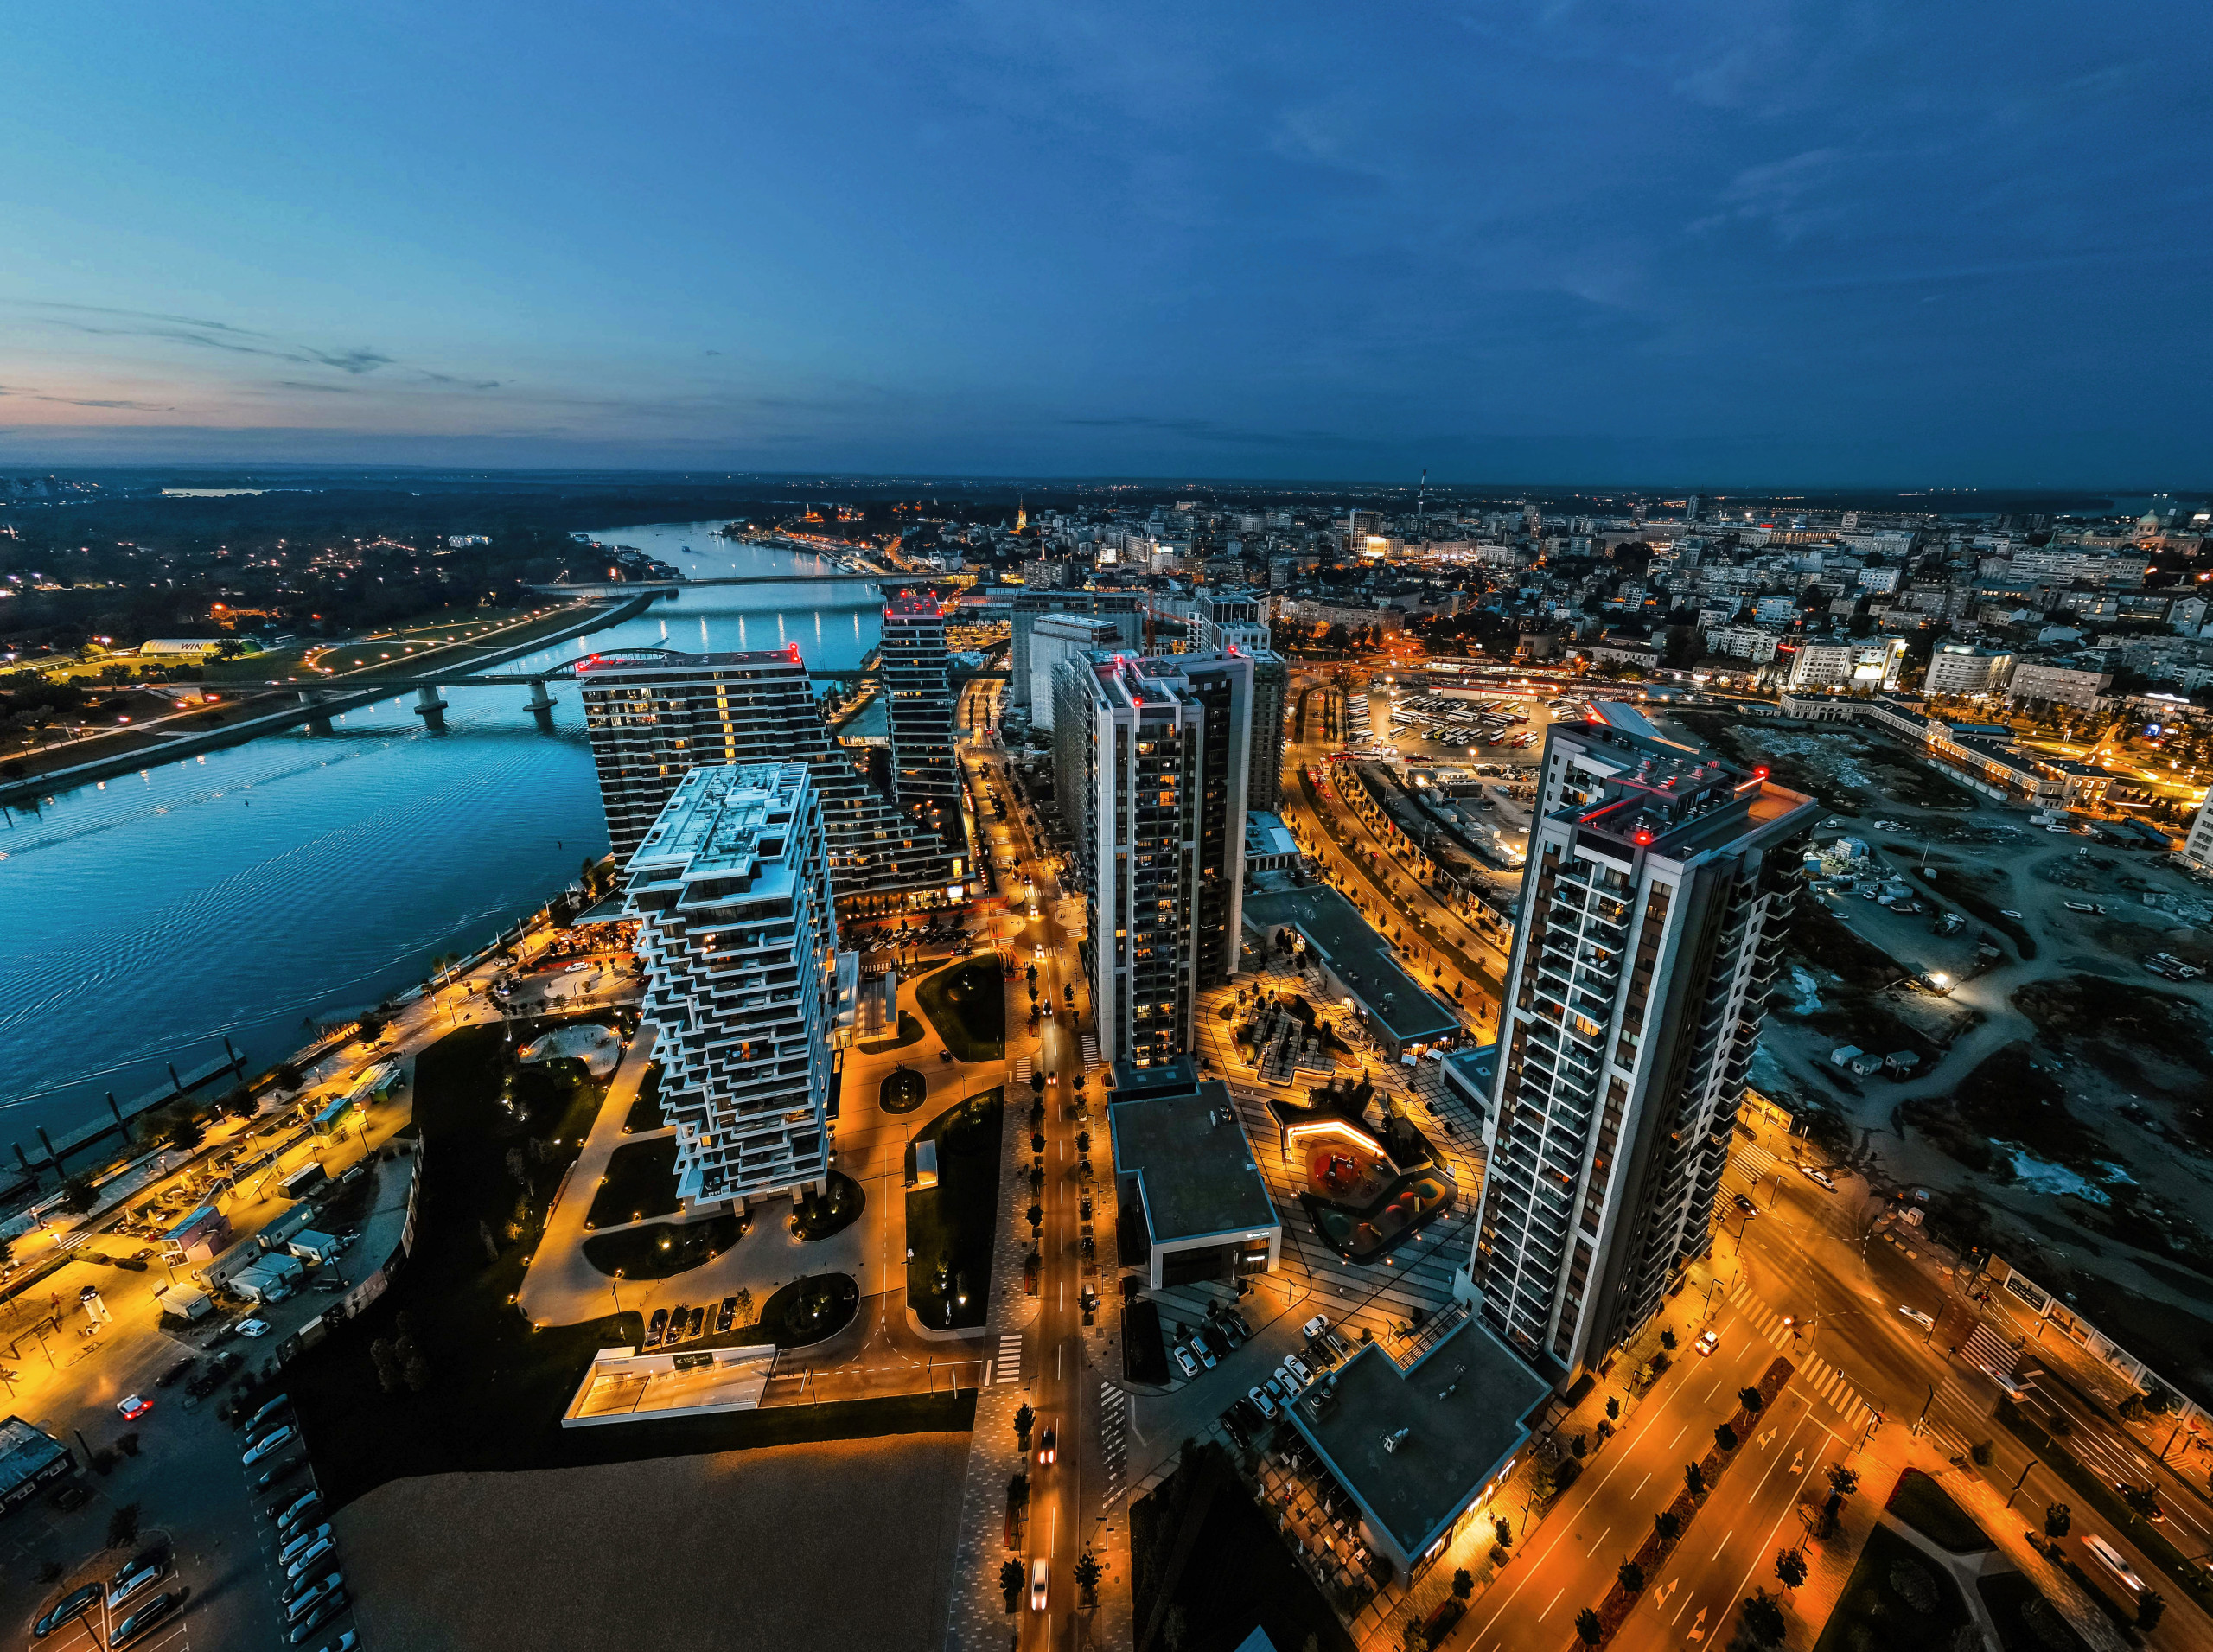 Belgrade Waterfront pays out dividends in the amount of EUR 10 million